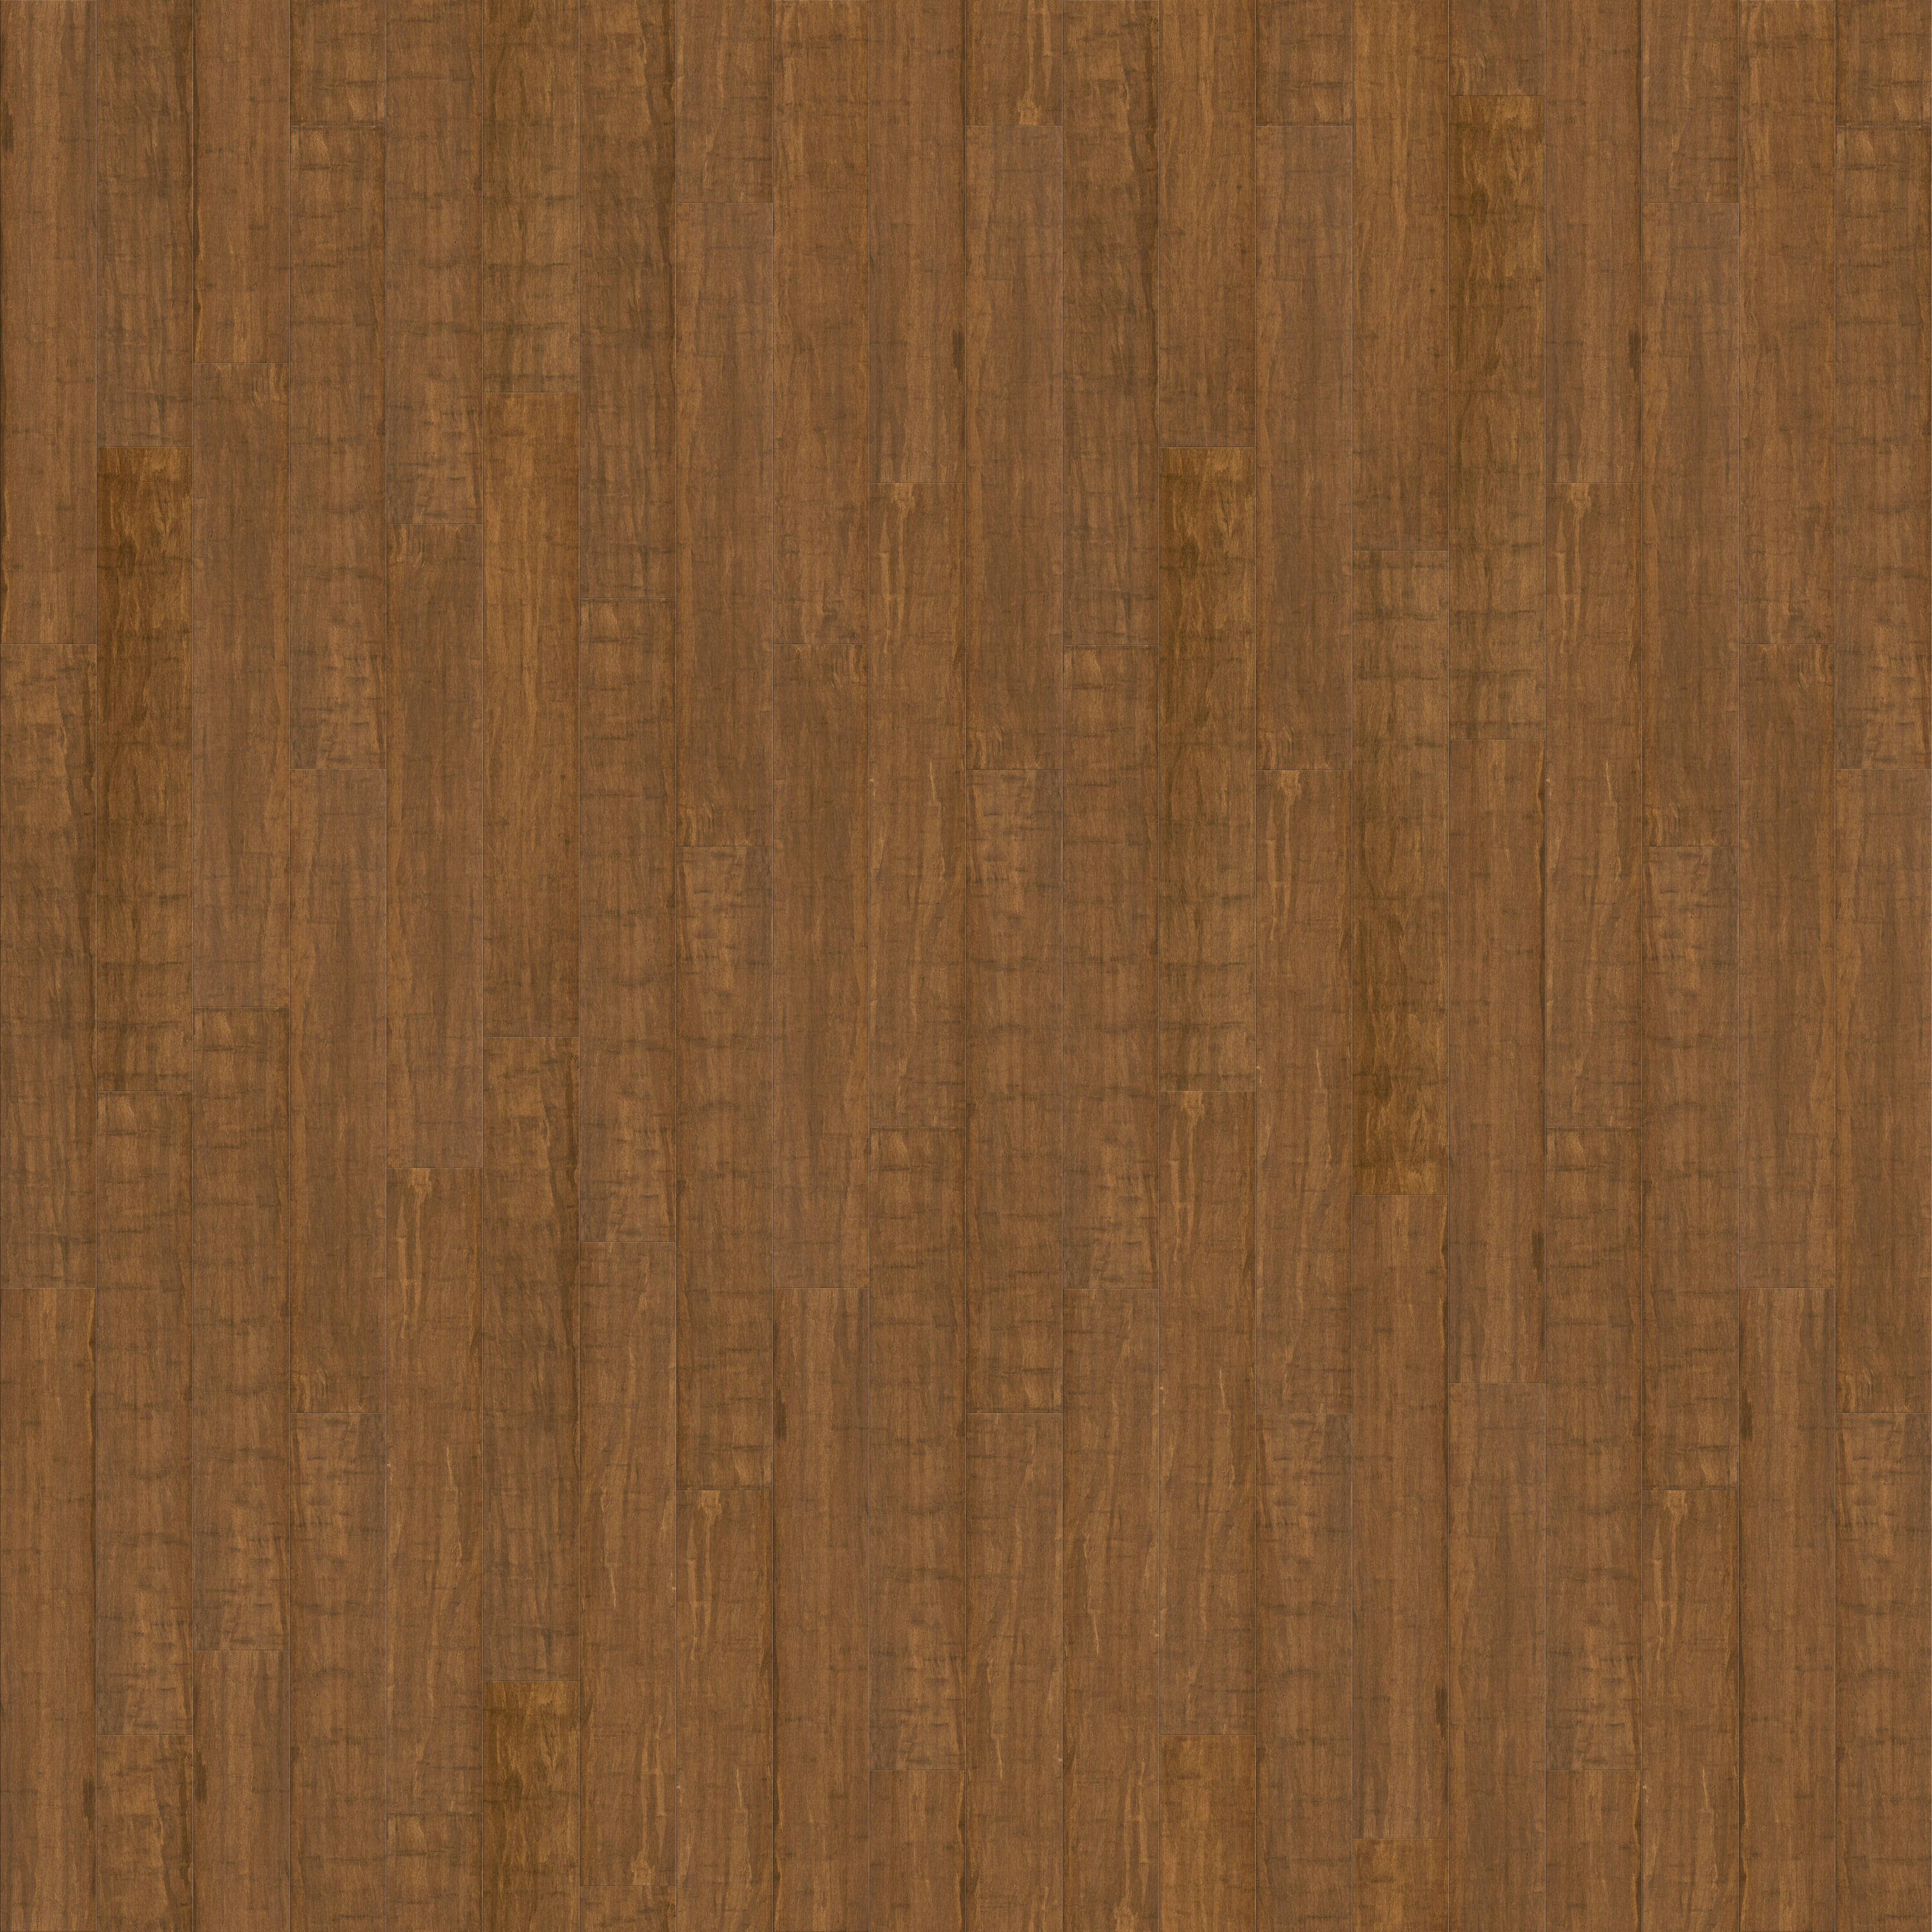 Fossilized Java Bamboo 5-5/16-in W x 9/16-in T x Smooth/Traditional Engineered Hardwood Flooring (21.5-sq ft) in Brown | - CALI 7014007200